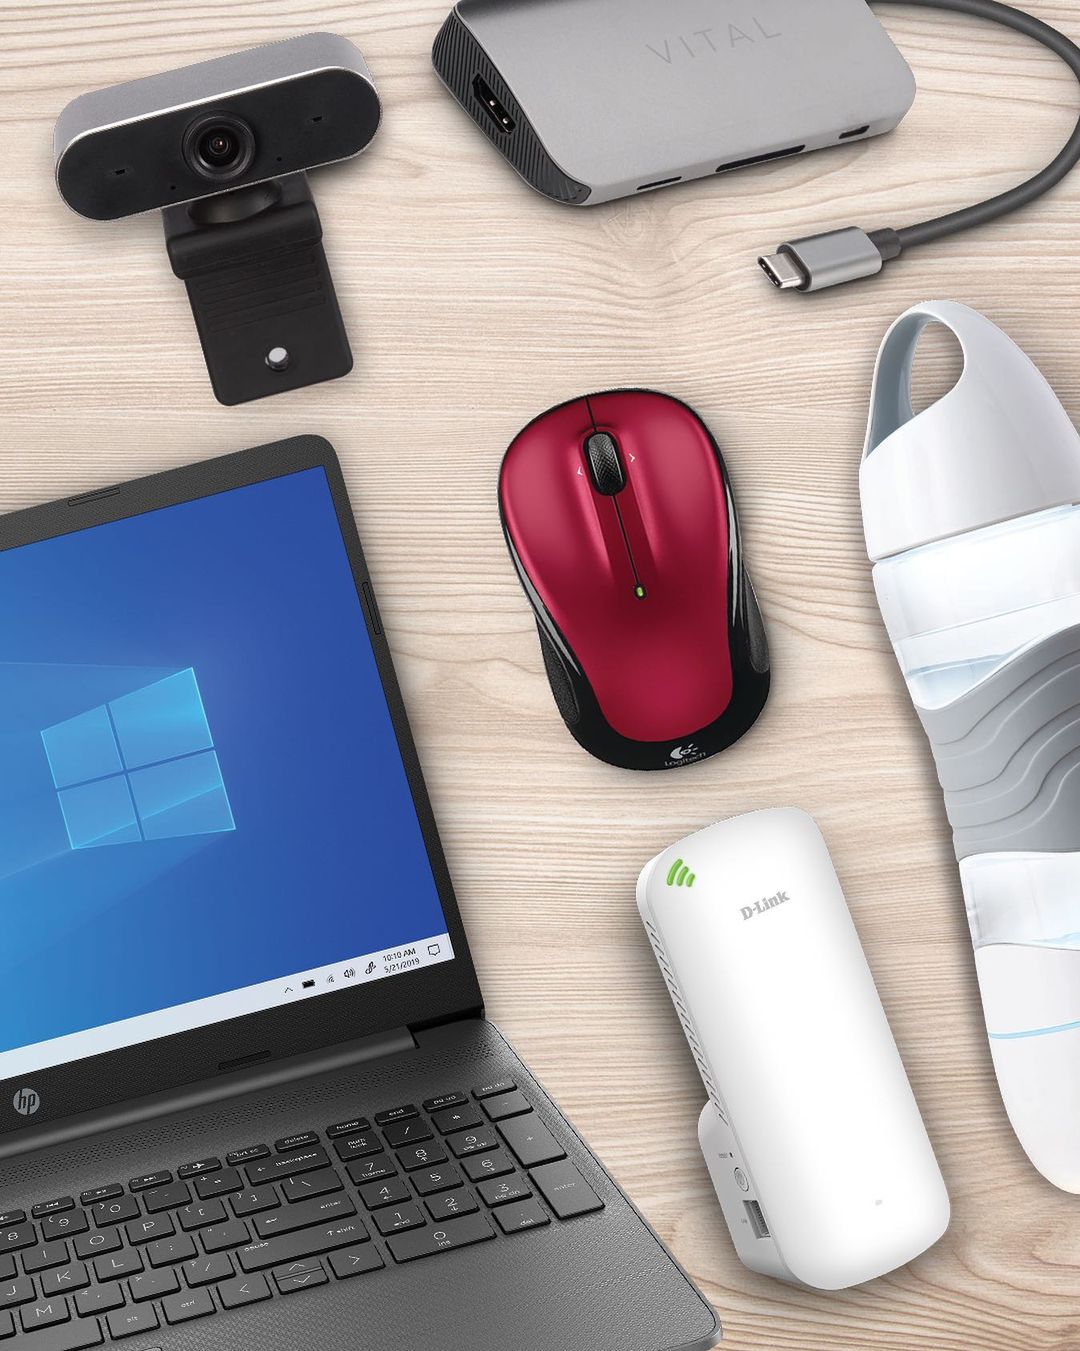 flat lay image of electronics including a laptop, a mouse, a portable webcam